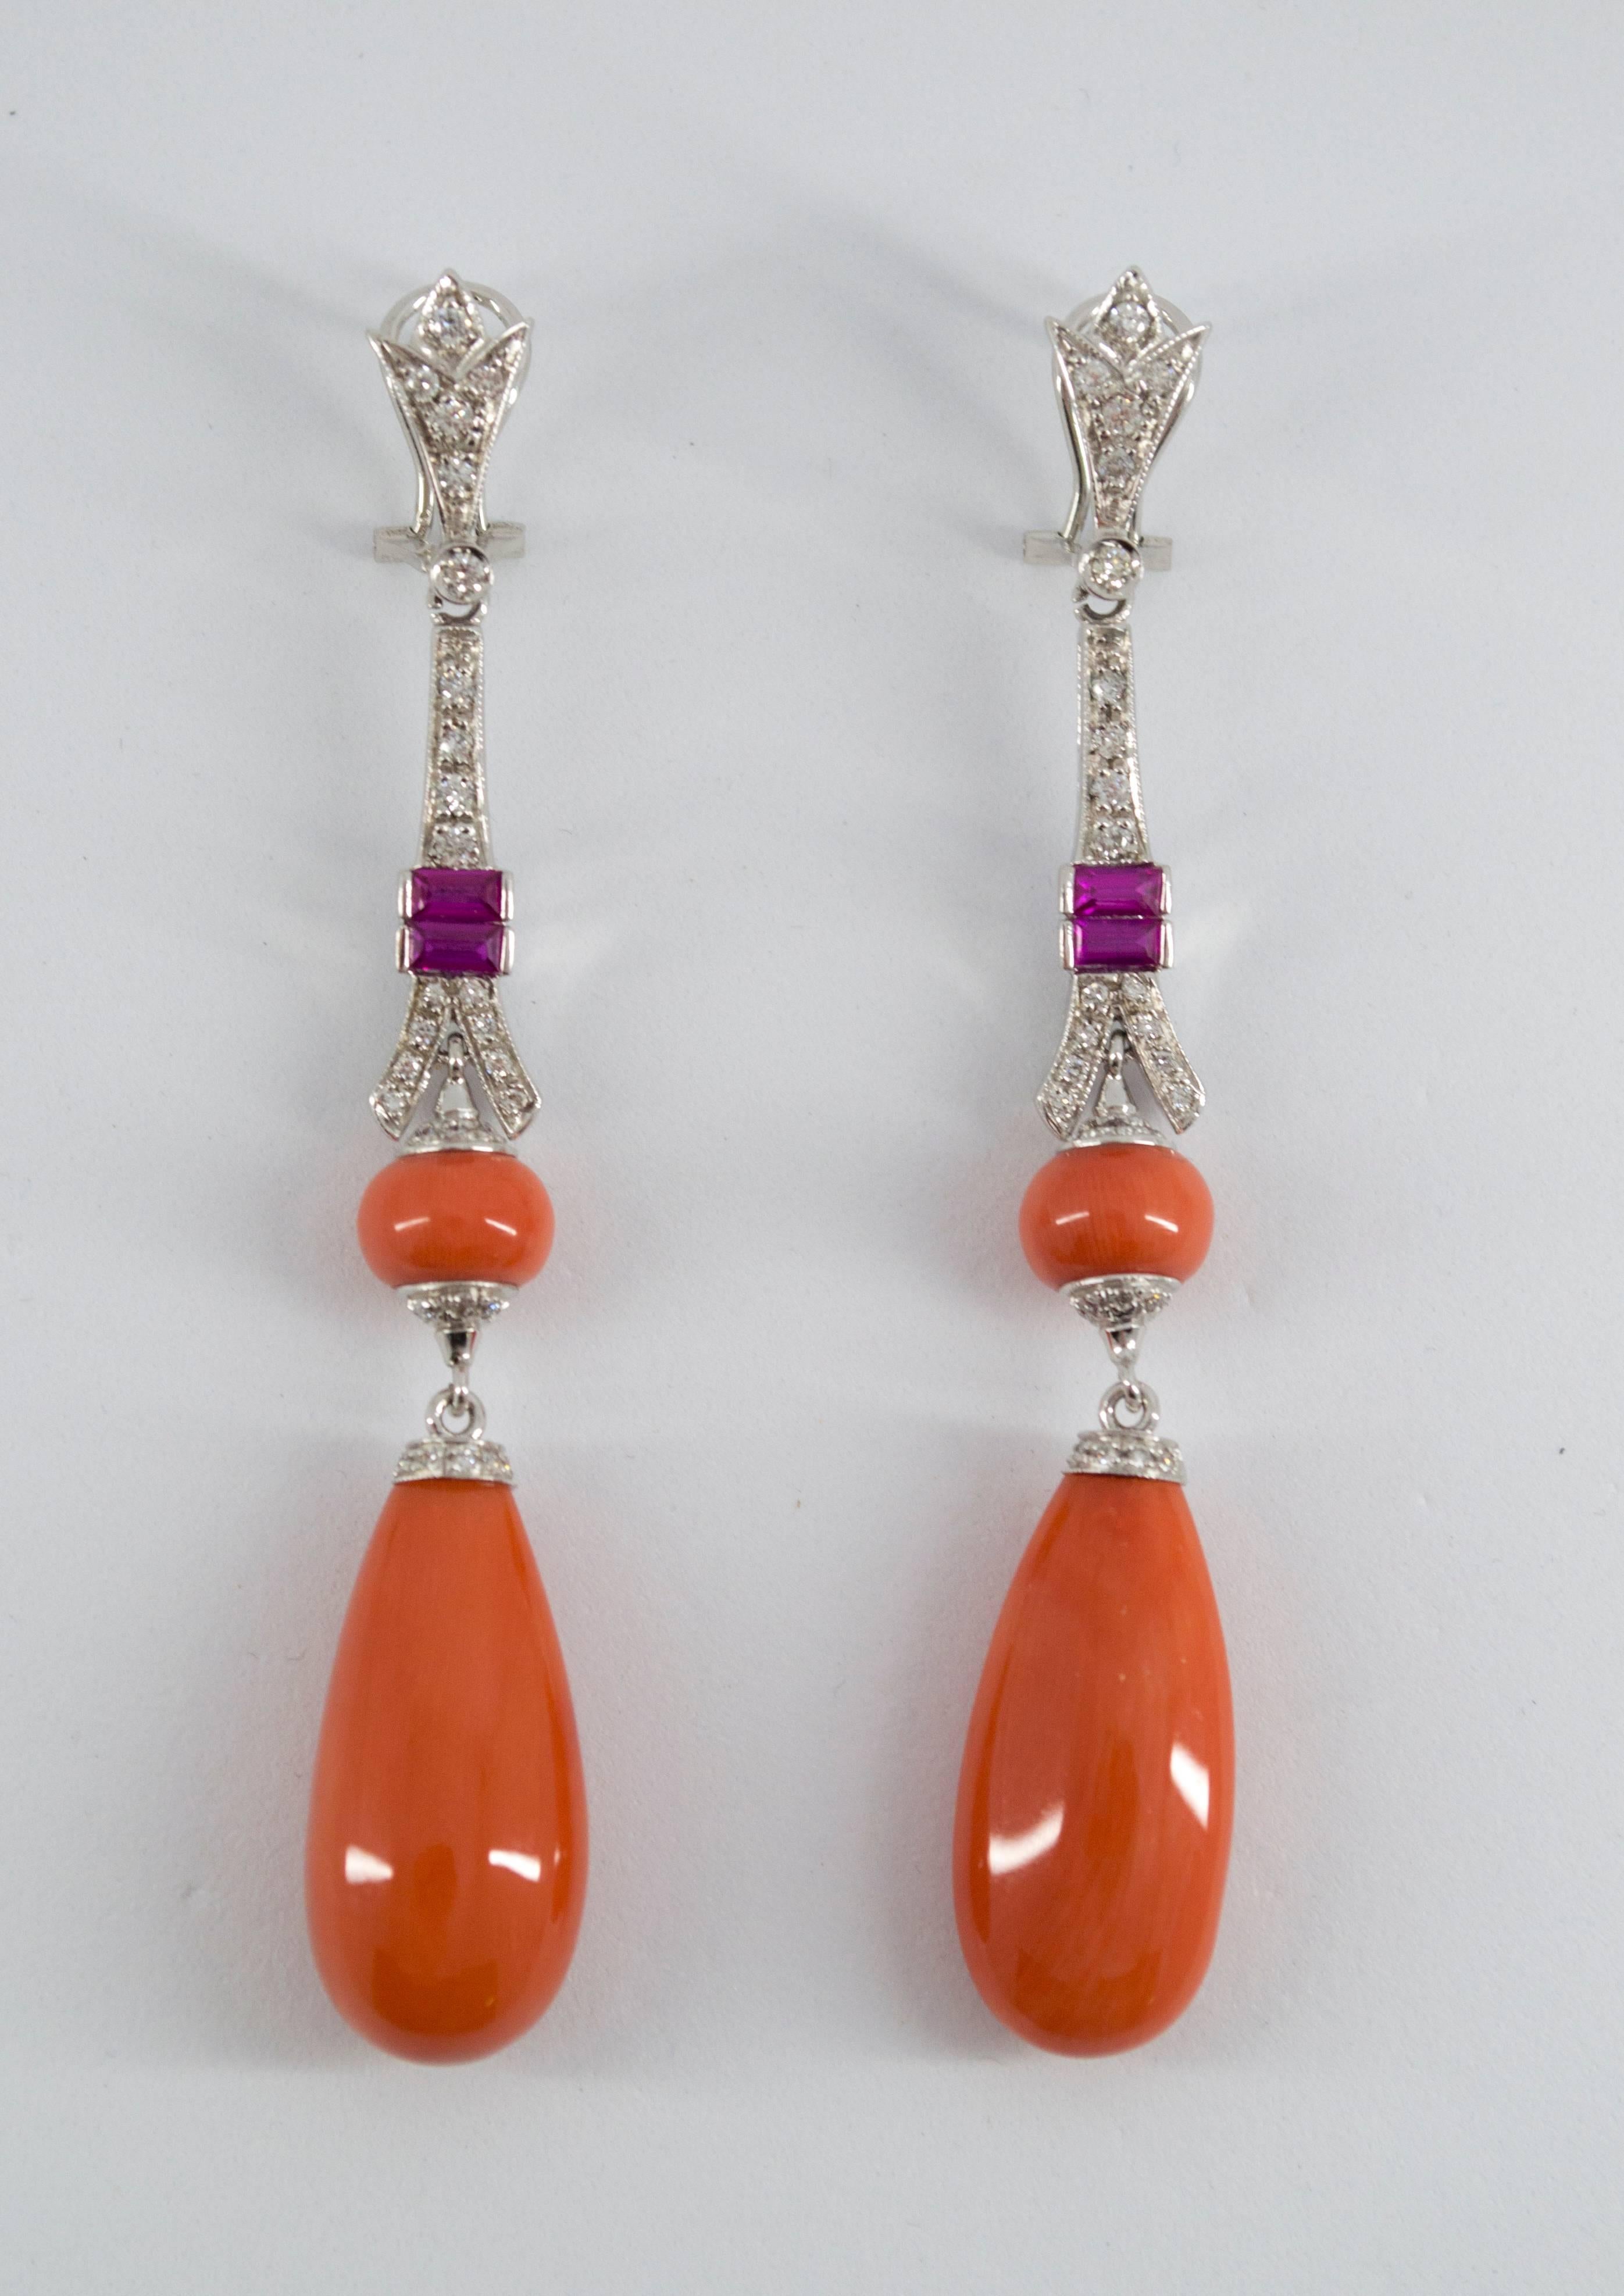 These Clip-On Earrings are made of 9K White Gold.
These Earrings have 0.90 Carats of White Diamonds.
These Earrings have Red Coral and Amethyst.
All our Earrings have pins for pierced ears but we can change the closure and make any of our Earrings